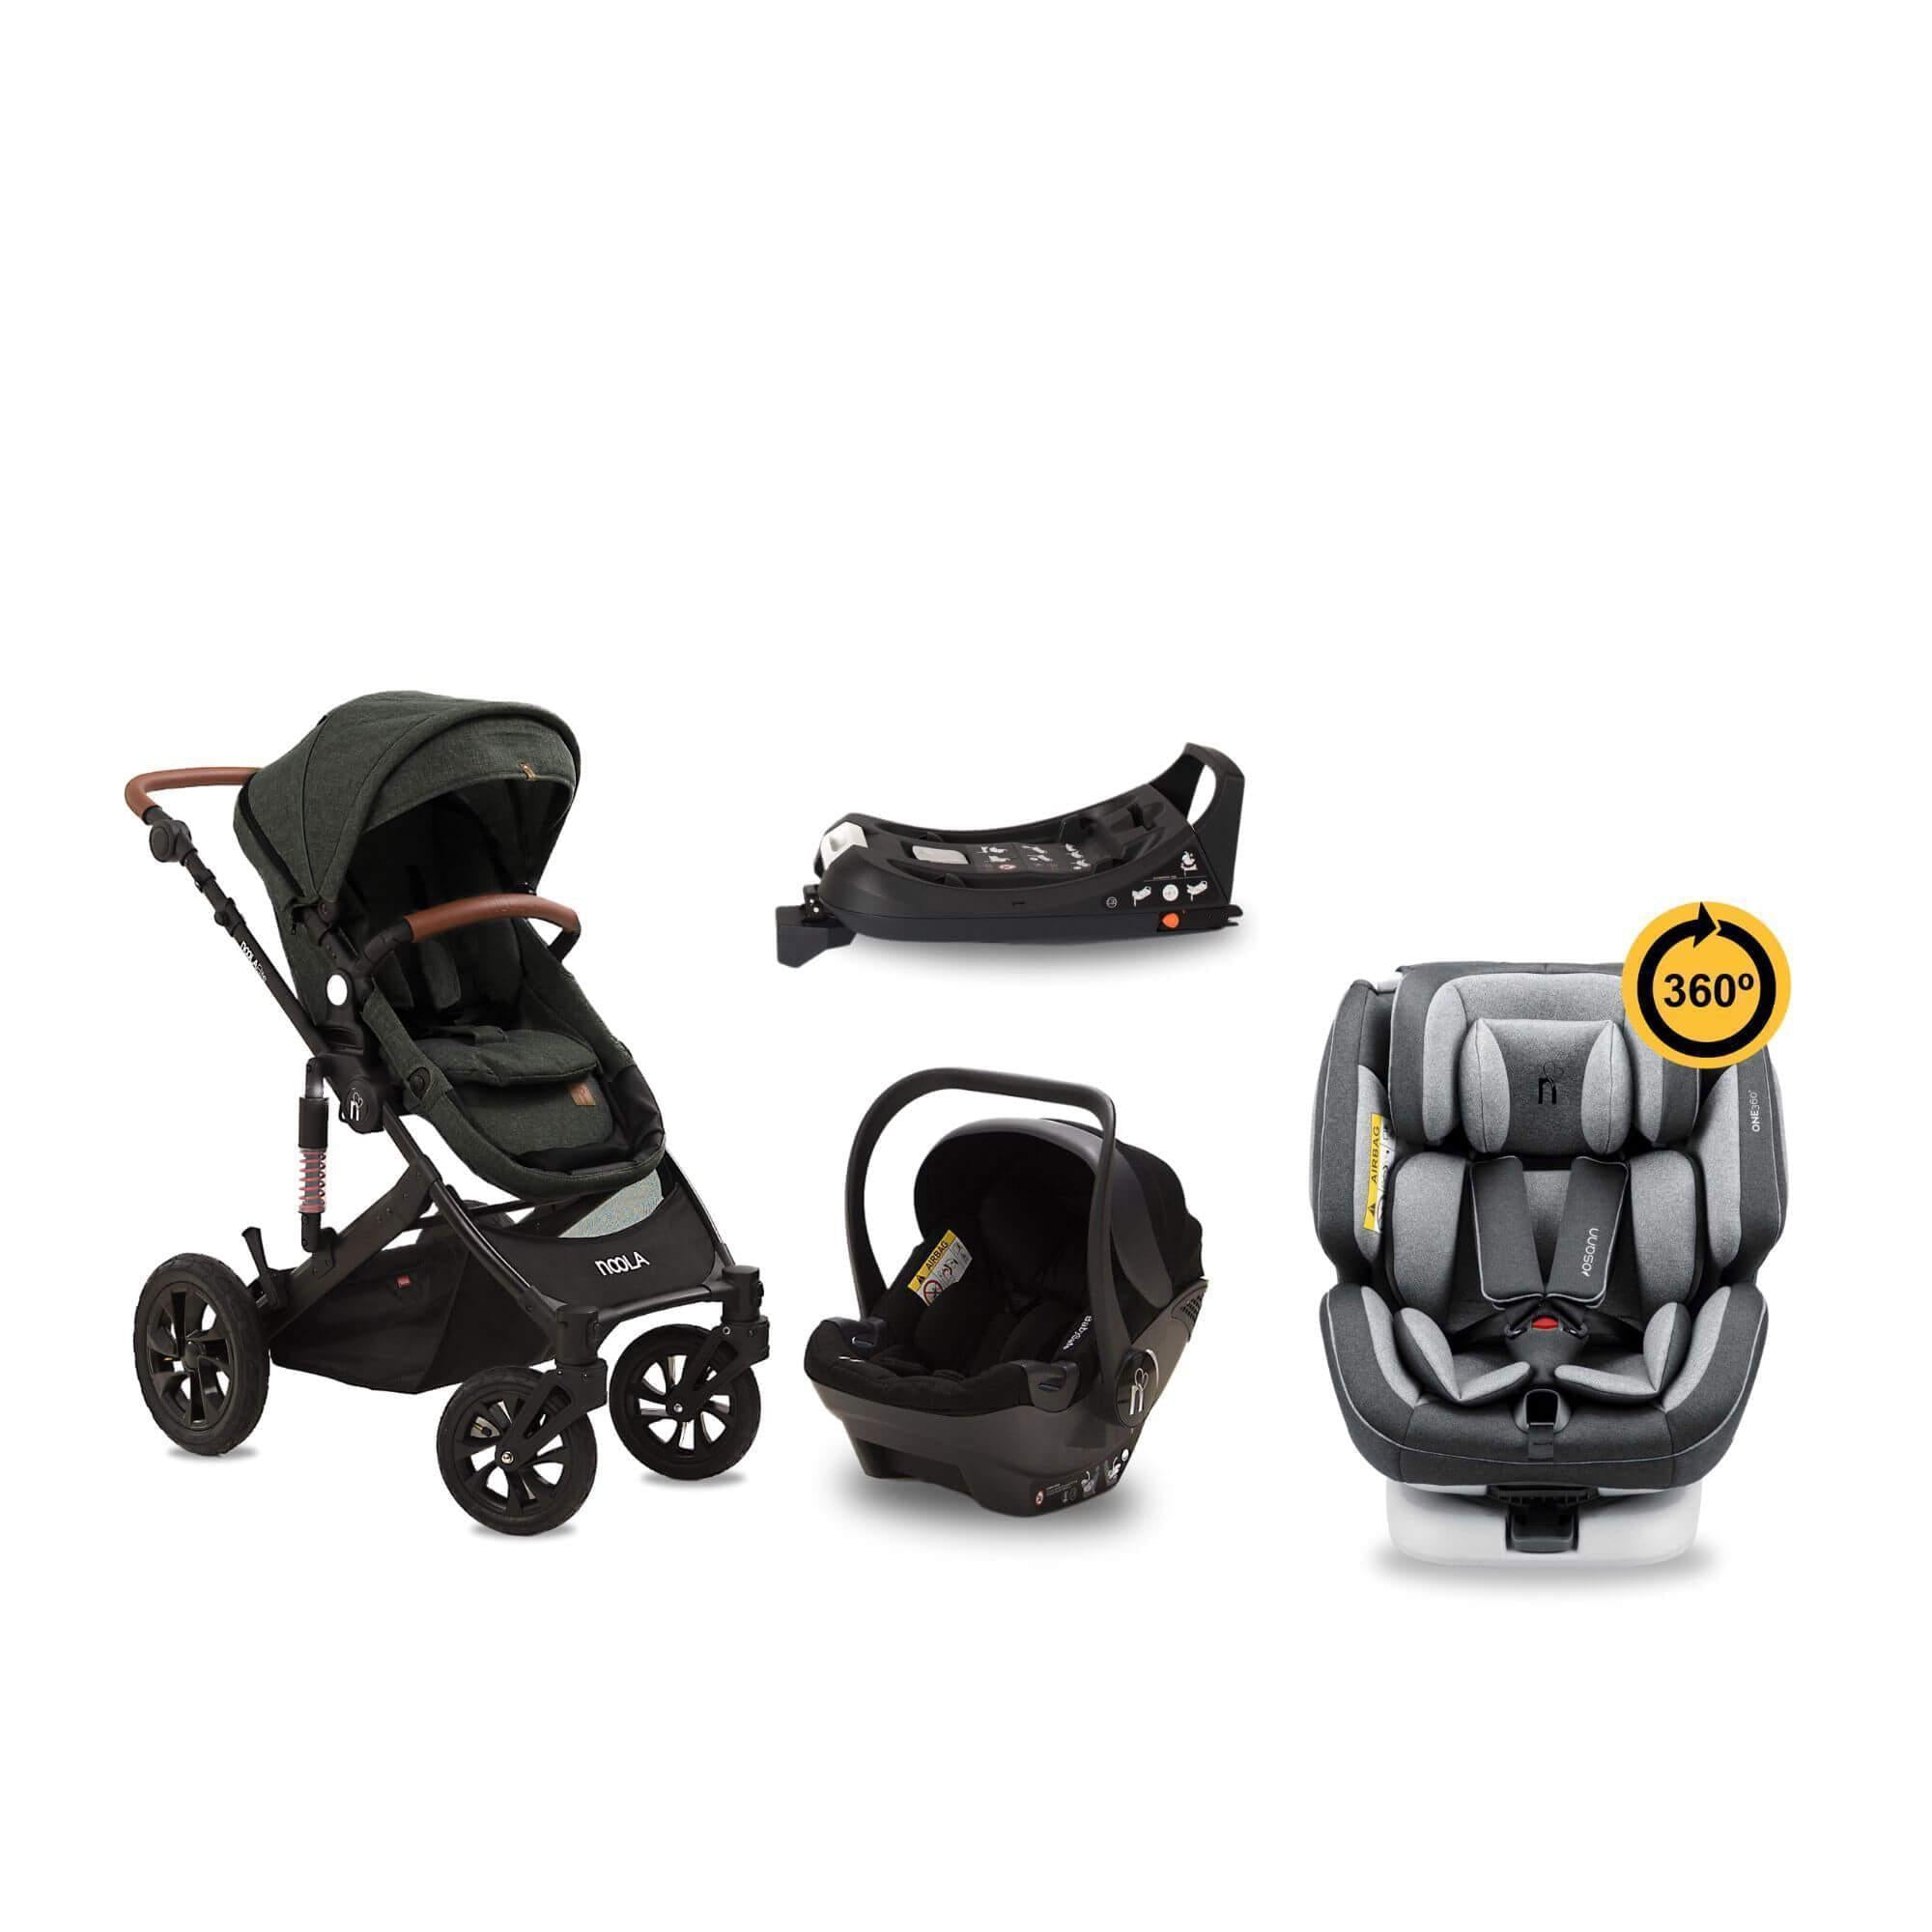 noola elite 5in1 all terrain baby toddler travel system french olive #SELECT THE COLOUR OF YOUR ONE360_ONE360 | LUNAR GREY